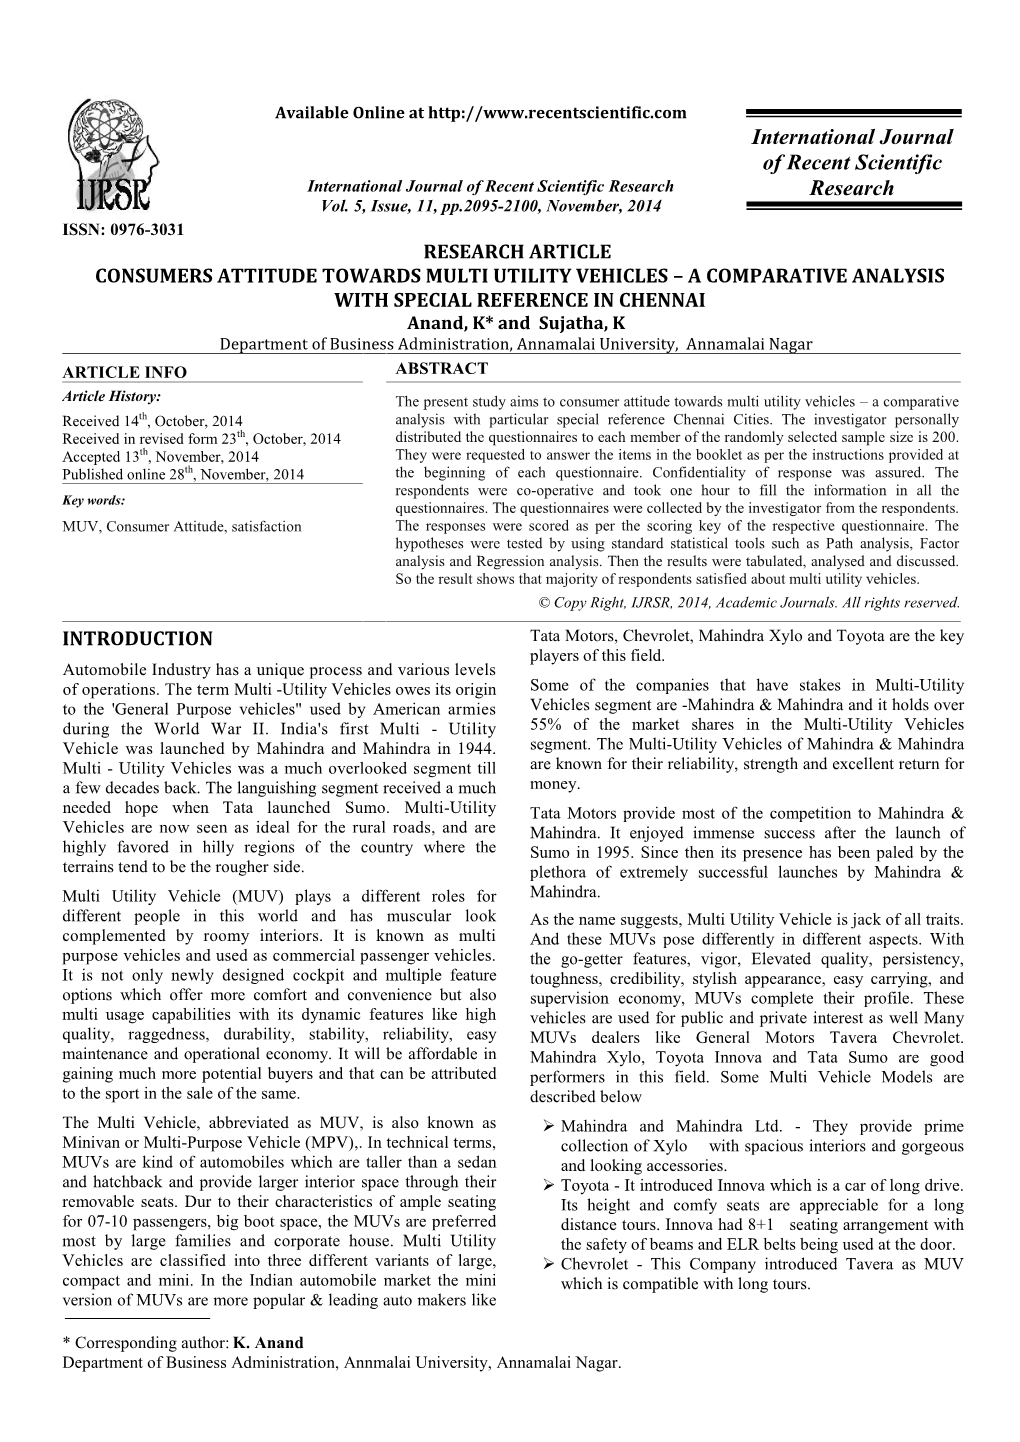 RESEARCH ARTICLE CONSUMERS ATTITUDE TOWARDS MULTI UTILITY VEHICLES – a COMPARATIVE ANALYSIS with SPECIAL REFERENCE in CHENNAI Anand, K* and Sujatha, K